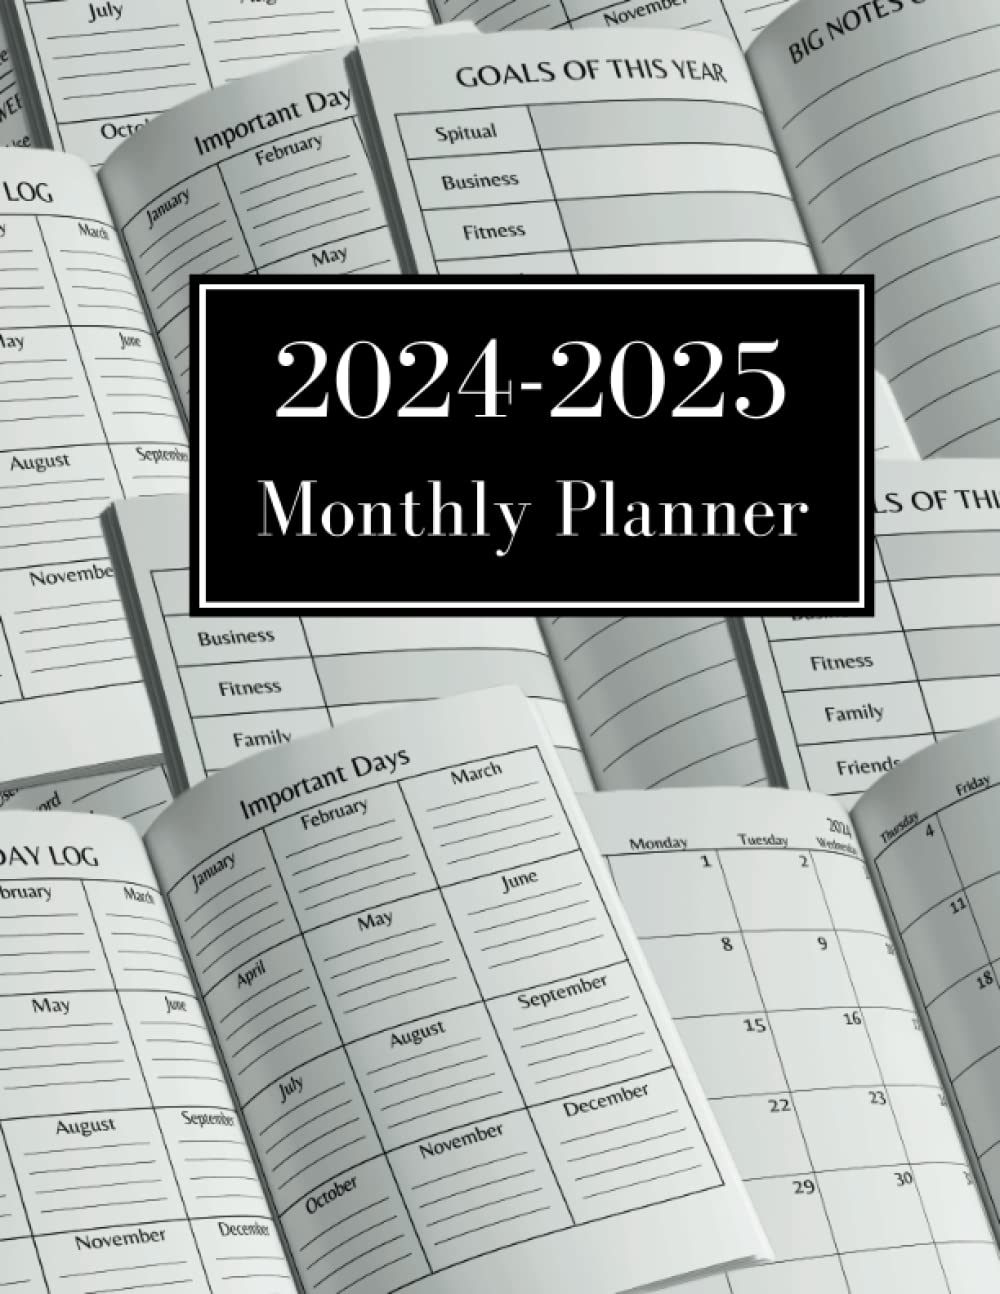 2024-2025 Monthly Planner 2 years: 24 Months Planner, January 2024 to December 2025, 2-Year Calendar & Monthly Planner- 8.5x11 inches